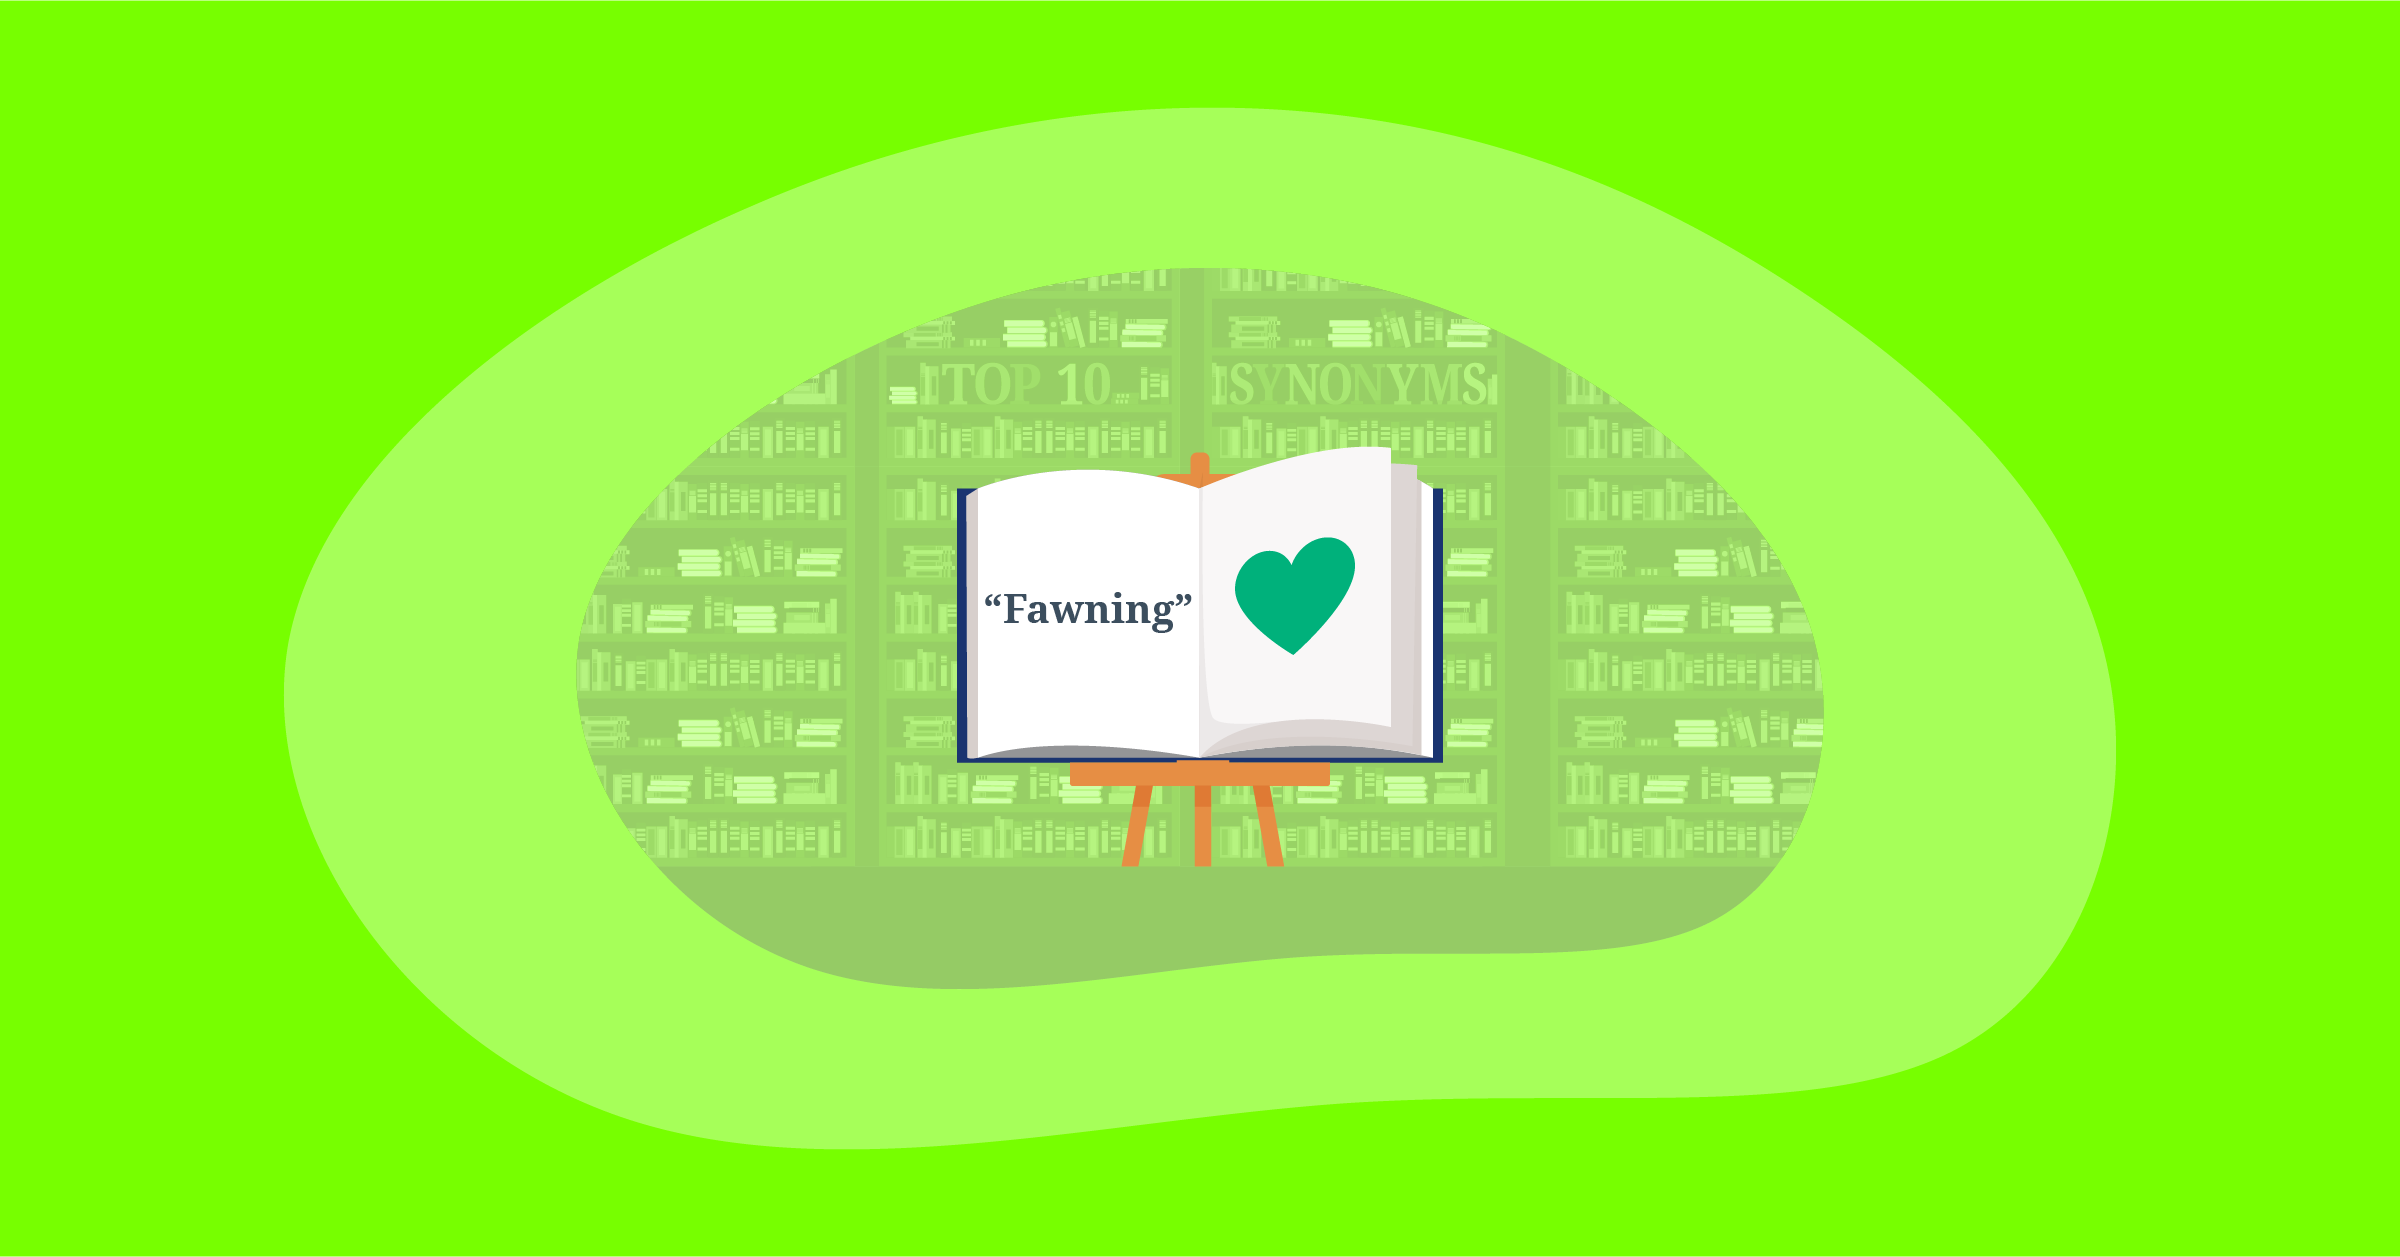 Illustration for top 10 positive impactful words for "Fawning"